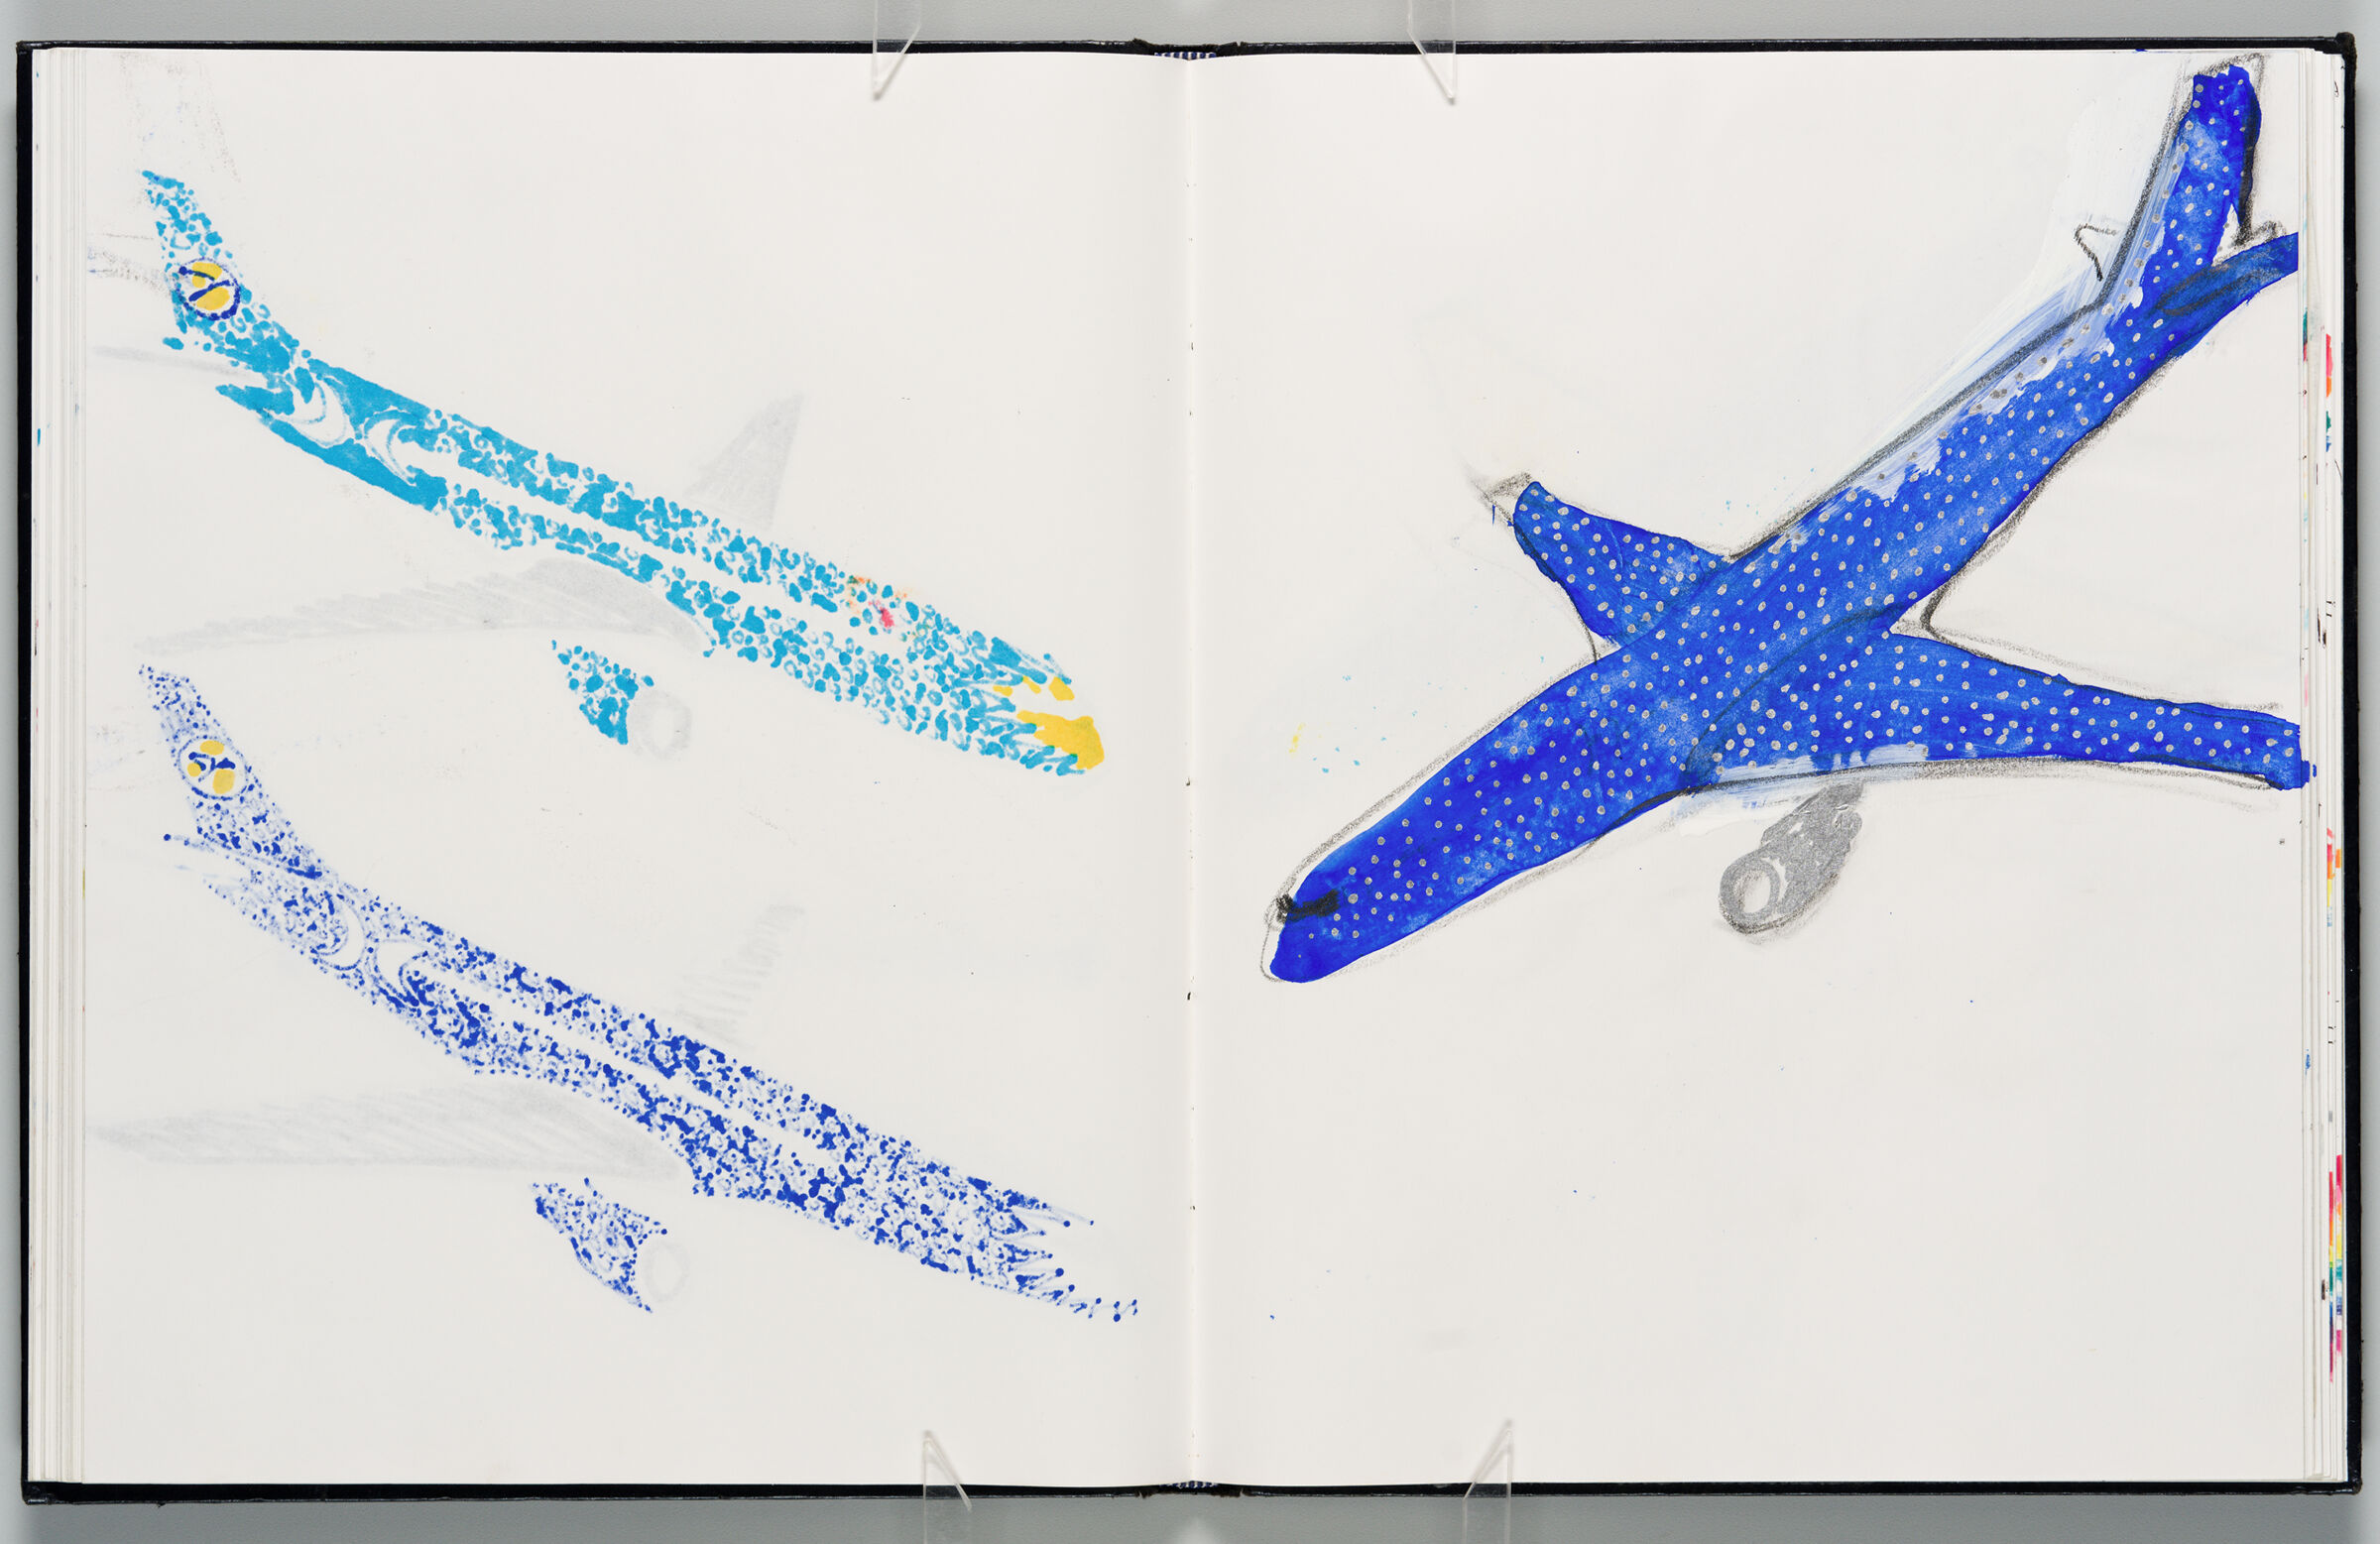 Untitled (Bleed-Through Of Previous Page, Left Page); Untitled (Starplane Design For Condor, Right Page)